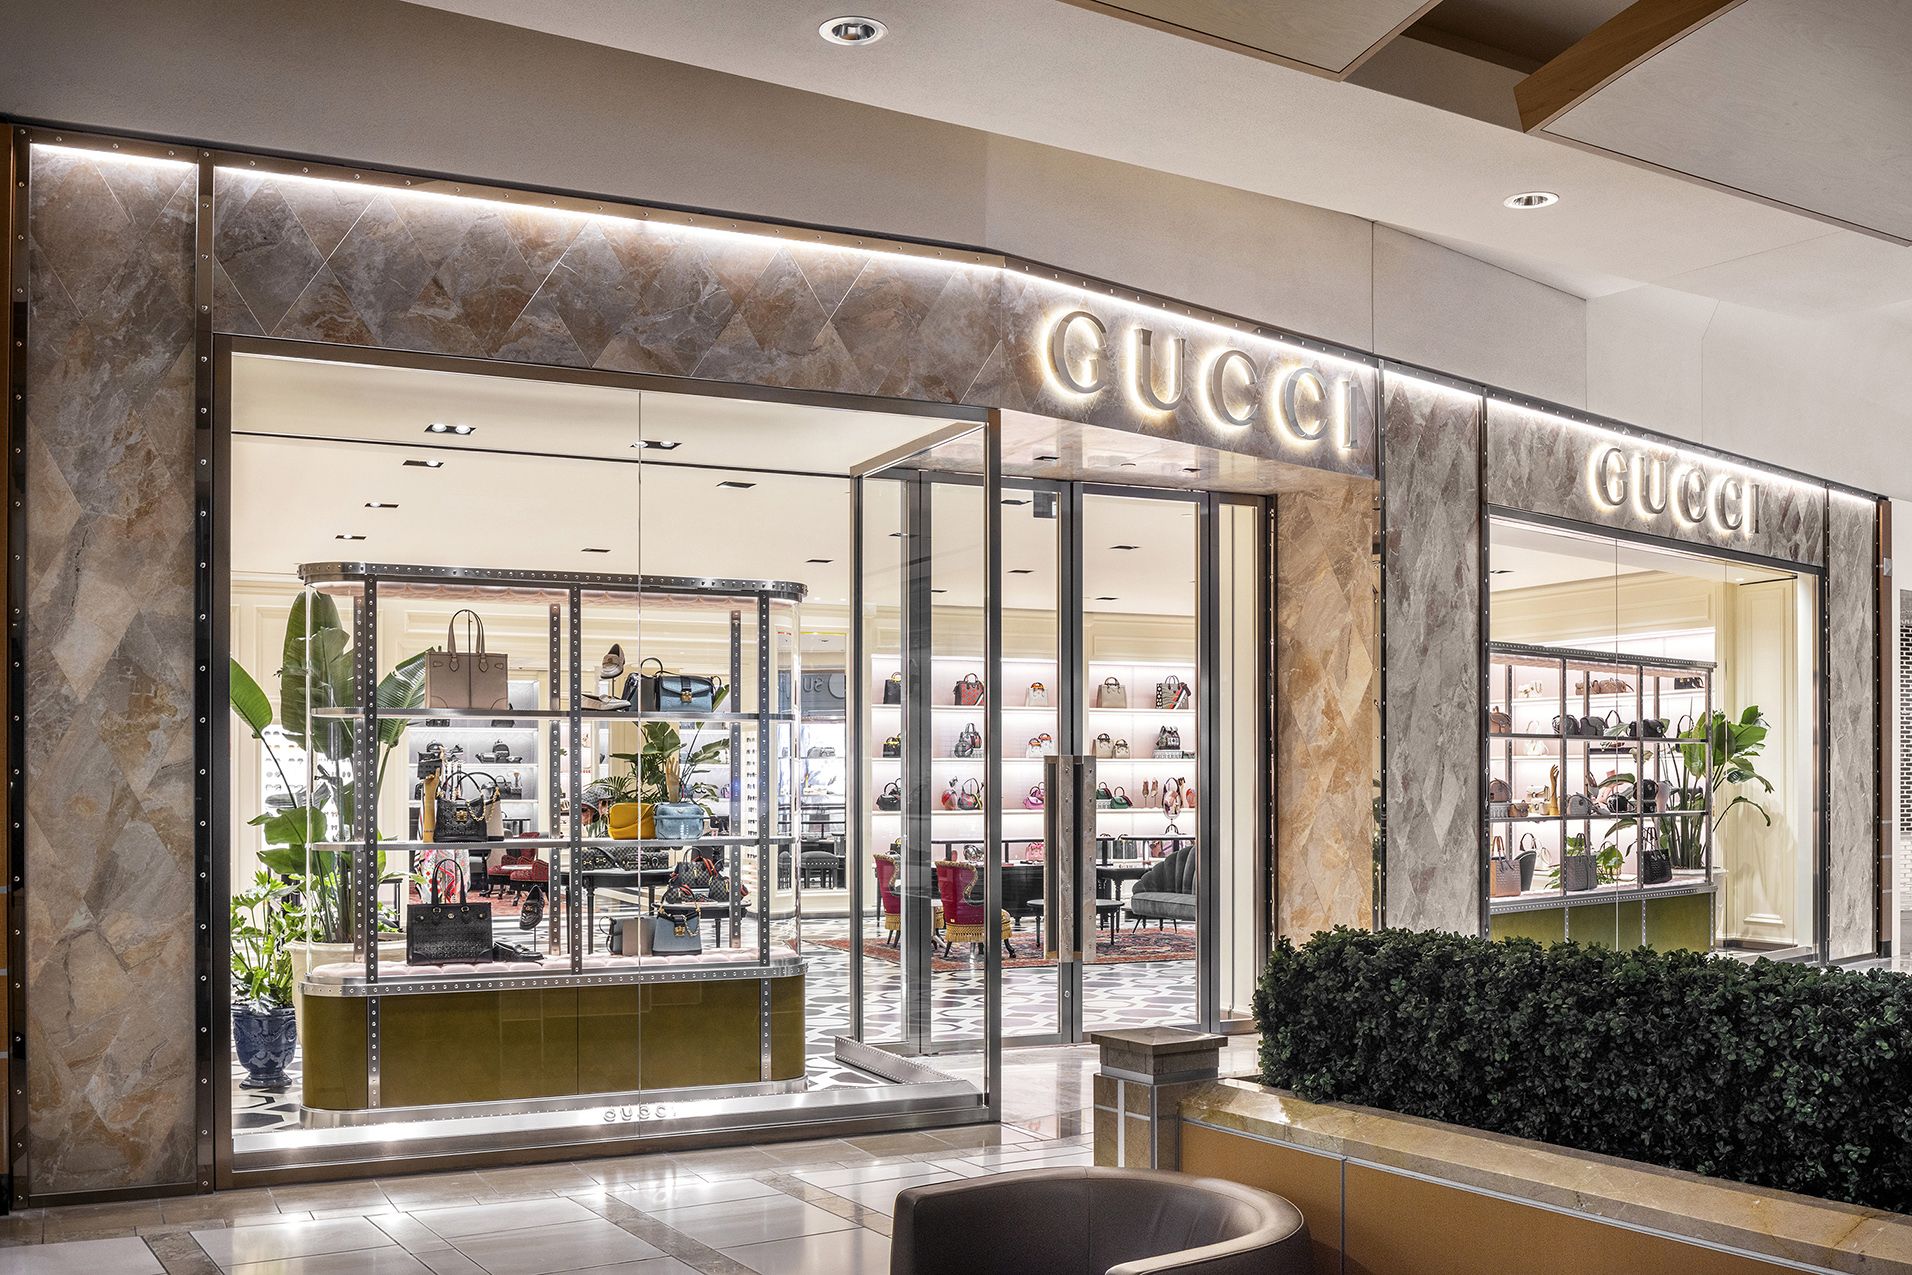 Gucci to establish store at Ross Park Mall - Pittsburgh Business Times